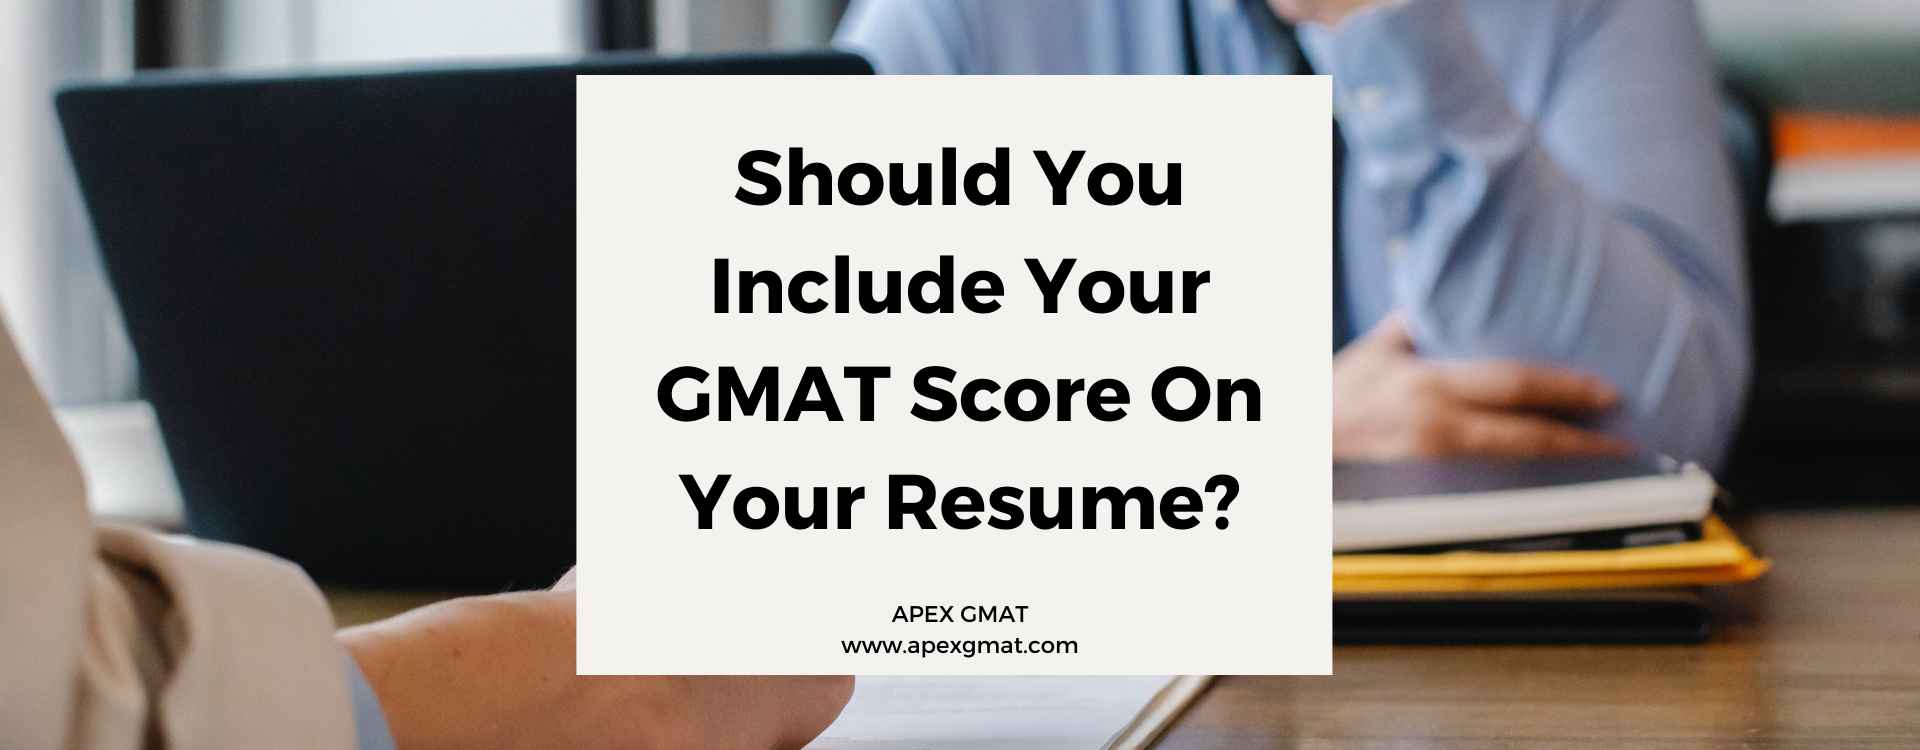 Should You Include Your GMAT Score On Your Resume?